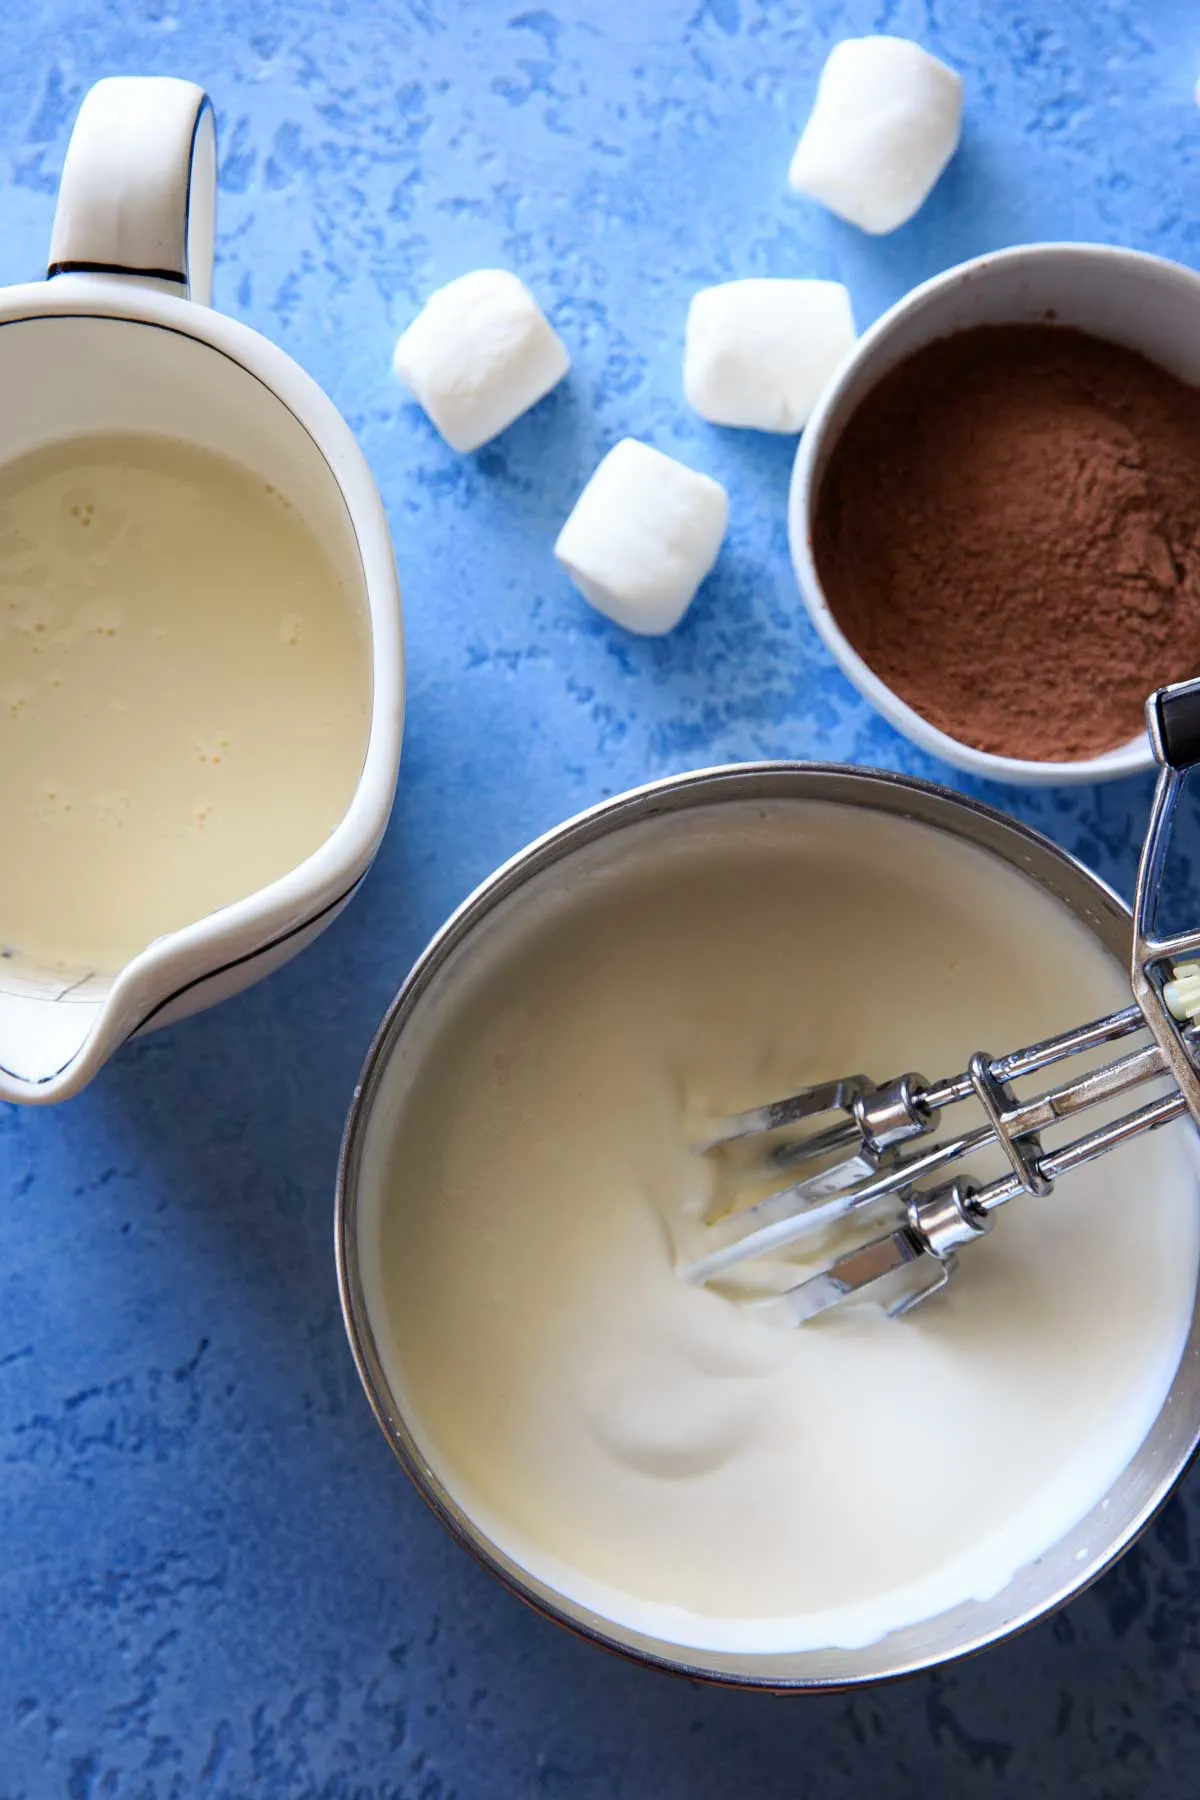 Hot Chocolate Ice Cream ingredients - homemade sweetened condensed milk, whipped whipping cream and hot chocolate mix